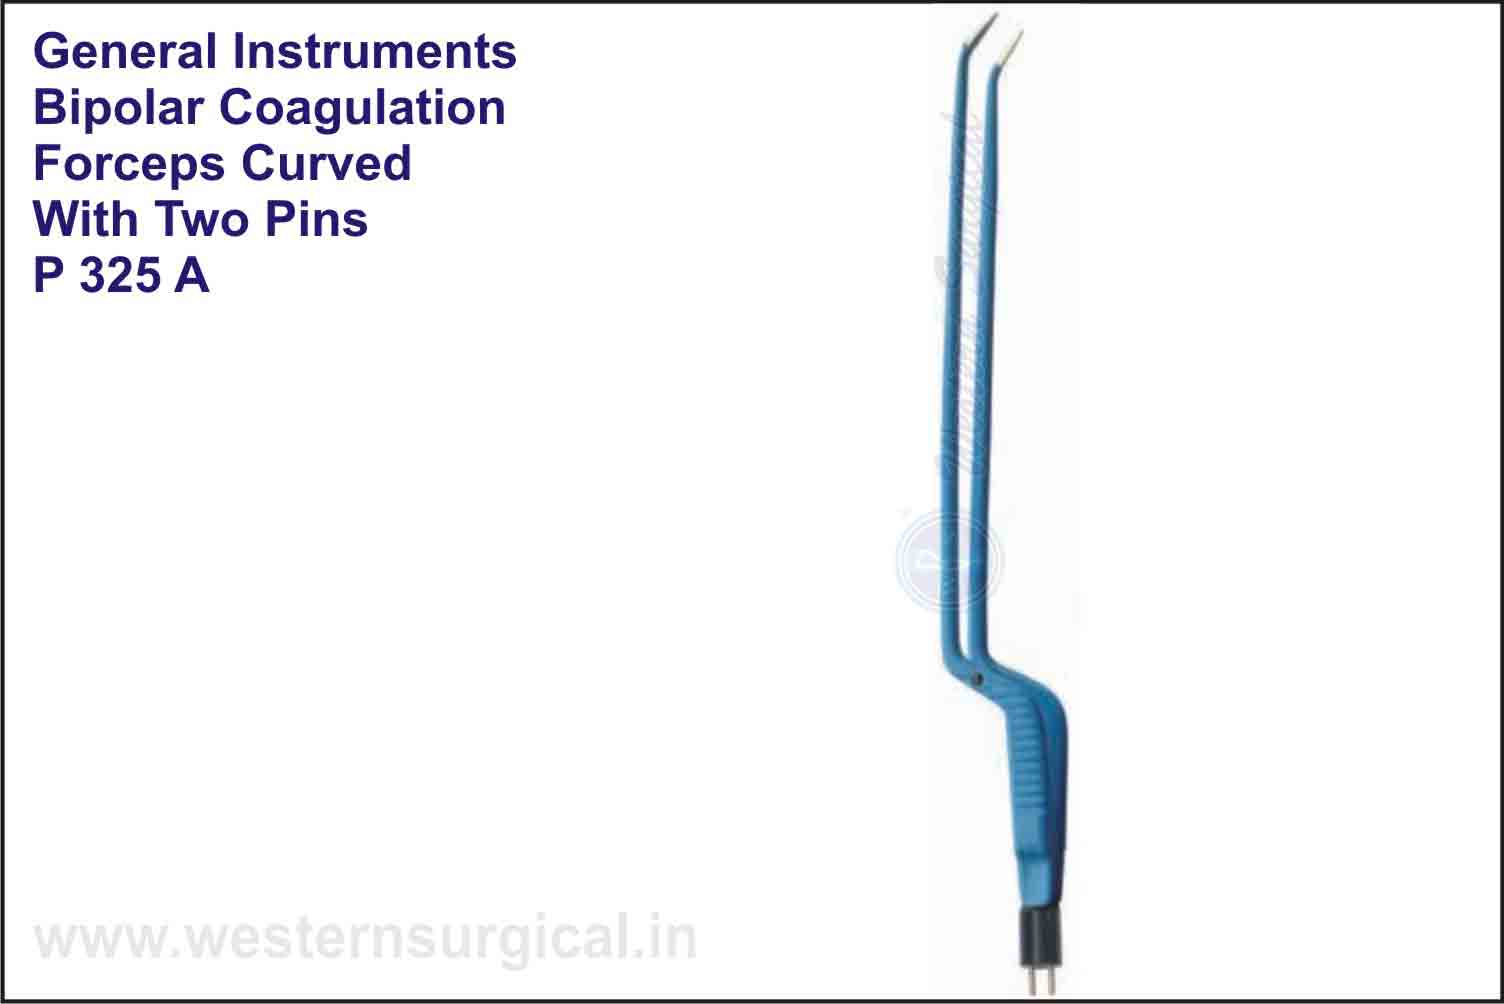 BIPOLAR COAGULATION FORCEPS CURVEDS WITH TWO PINS